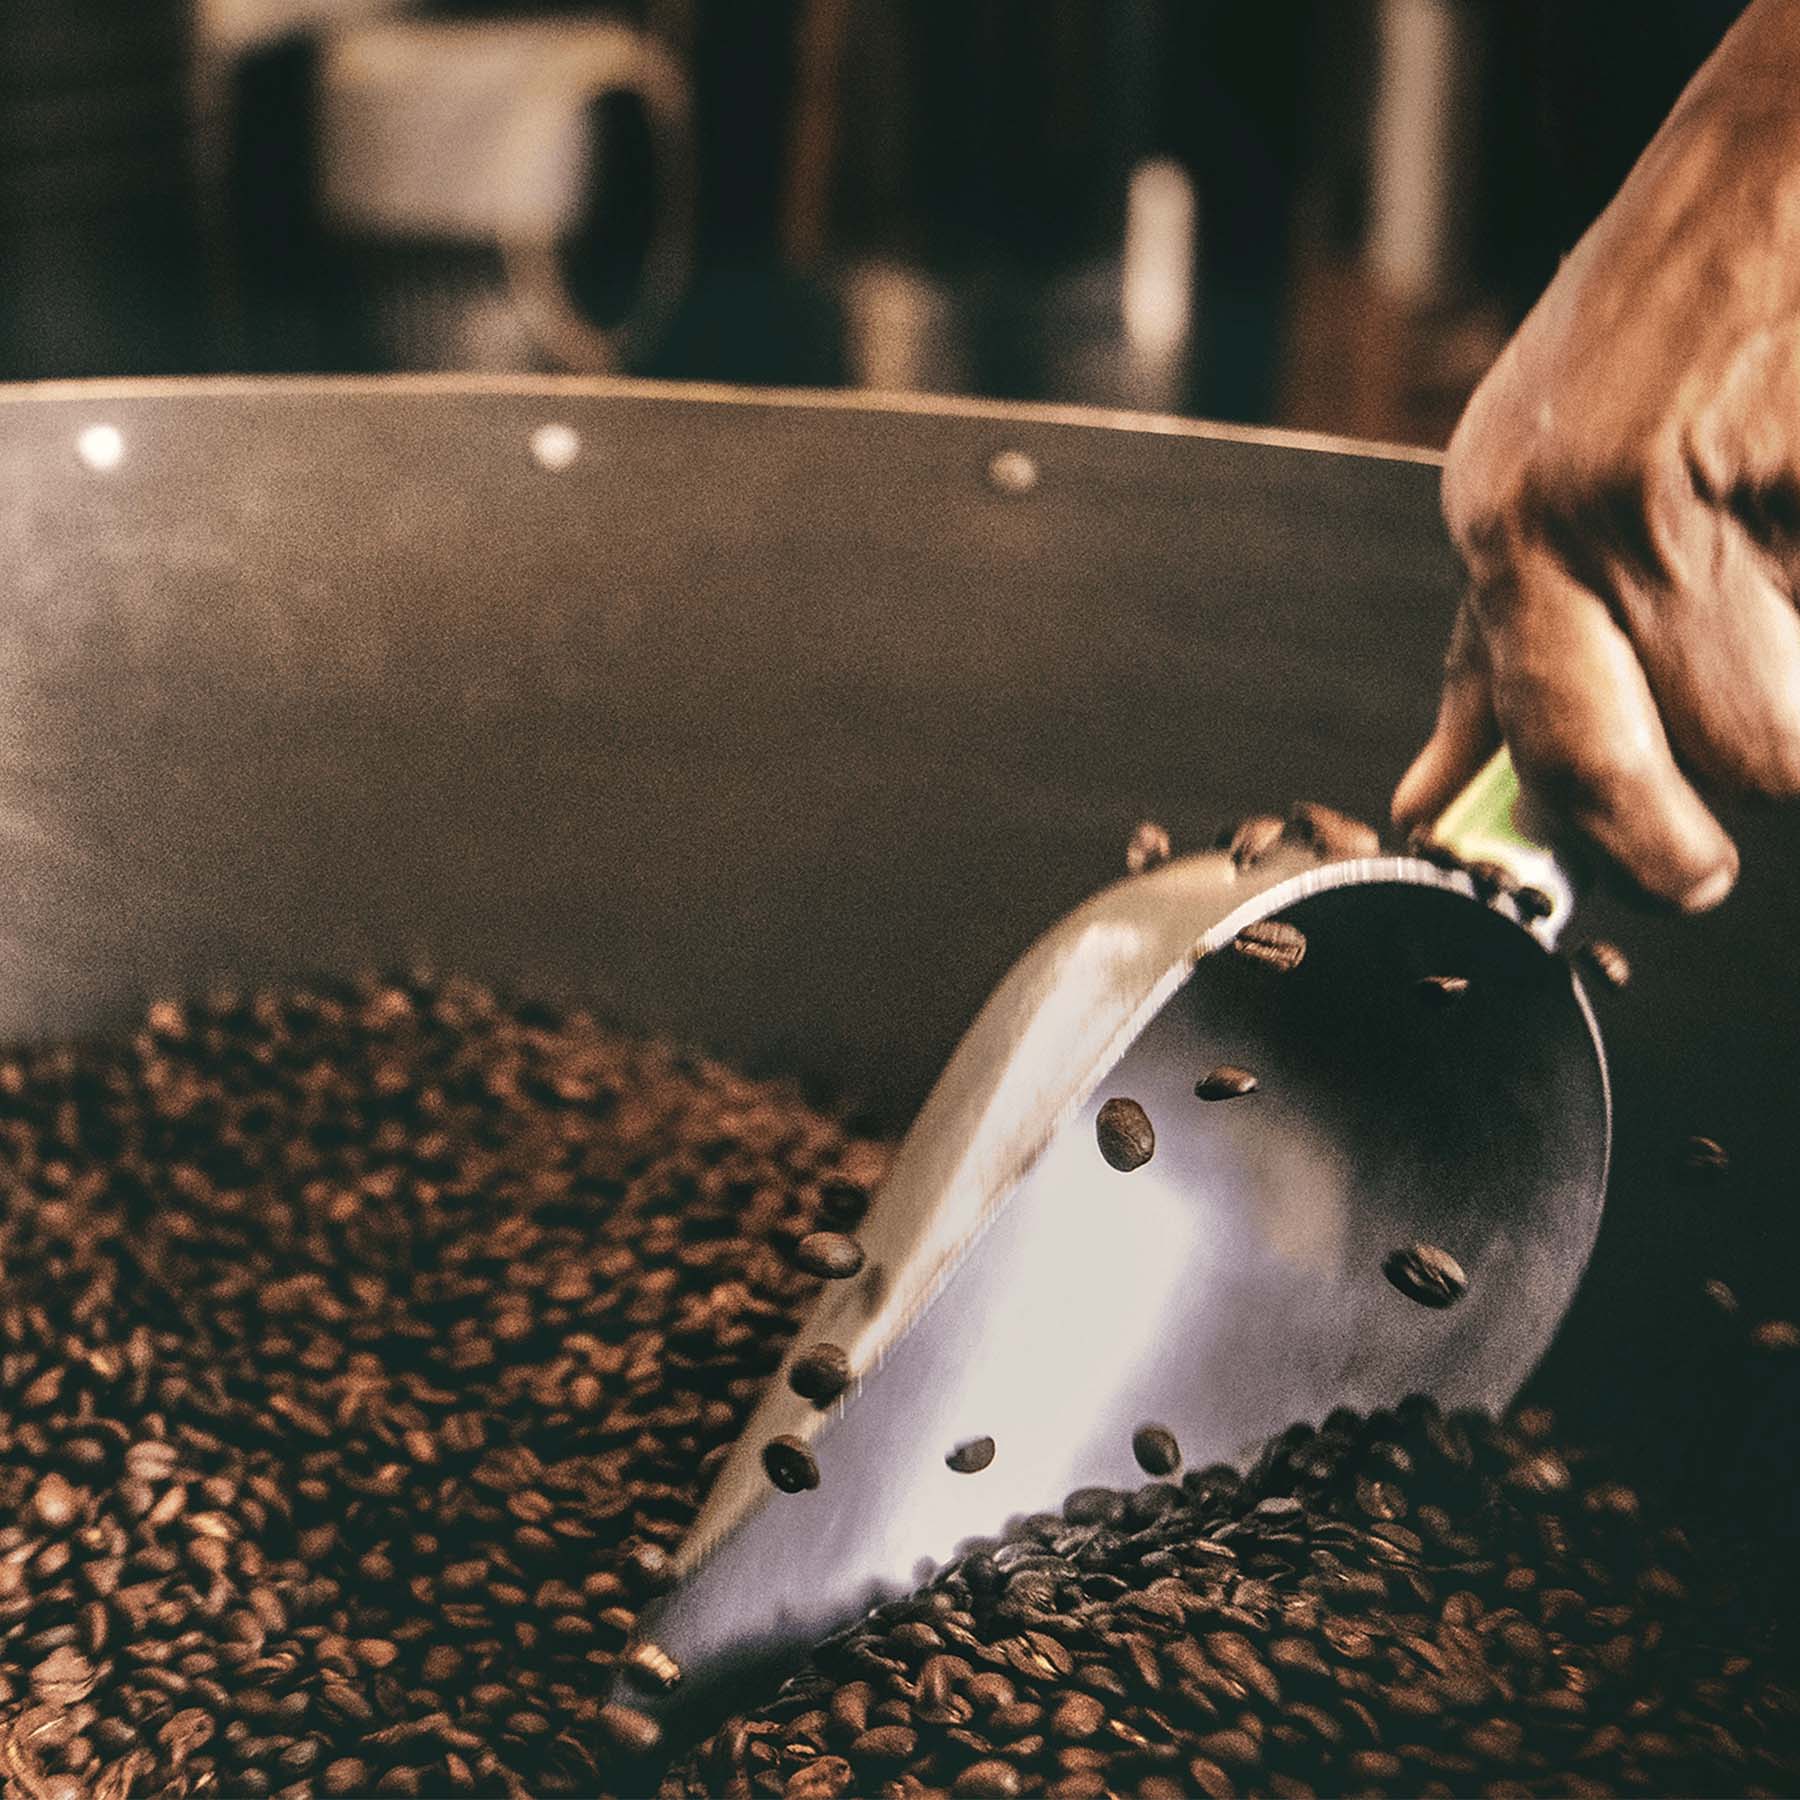 The coffee at BEAR is sustainably sourced and crafted to realised the most potential out of each origin. All of our coffee is freshly roasted and delivered into our stores, or direct to your home or office.